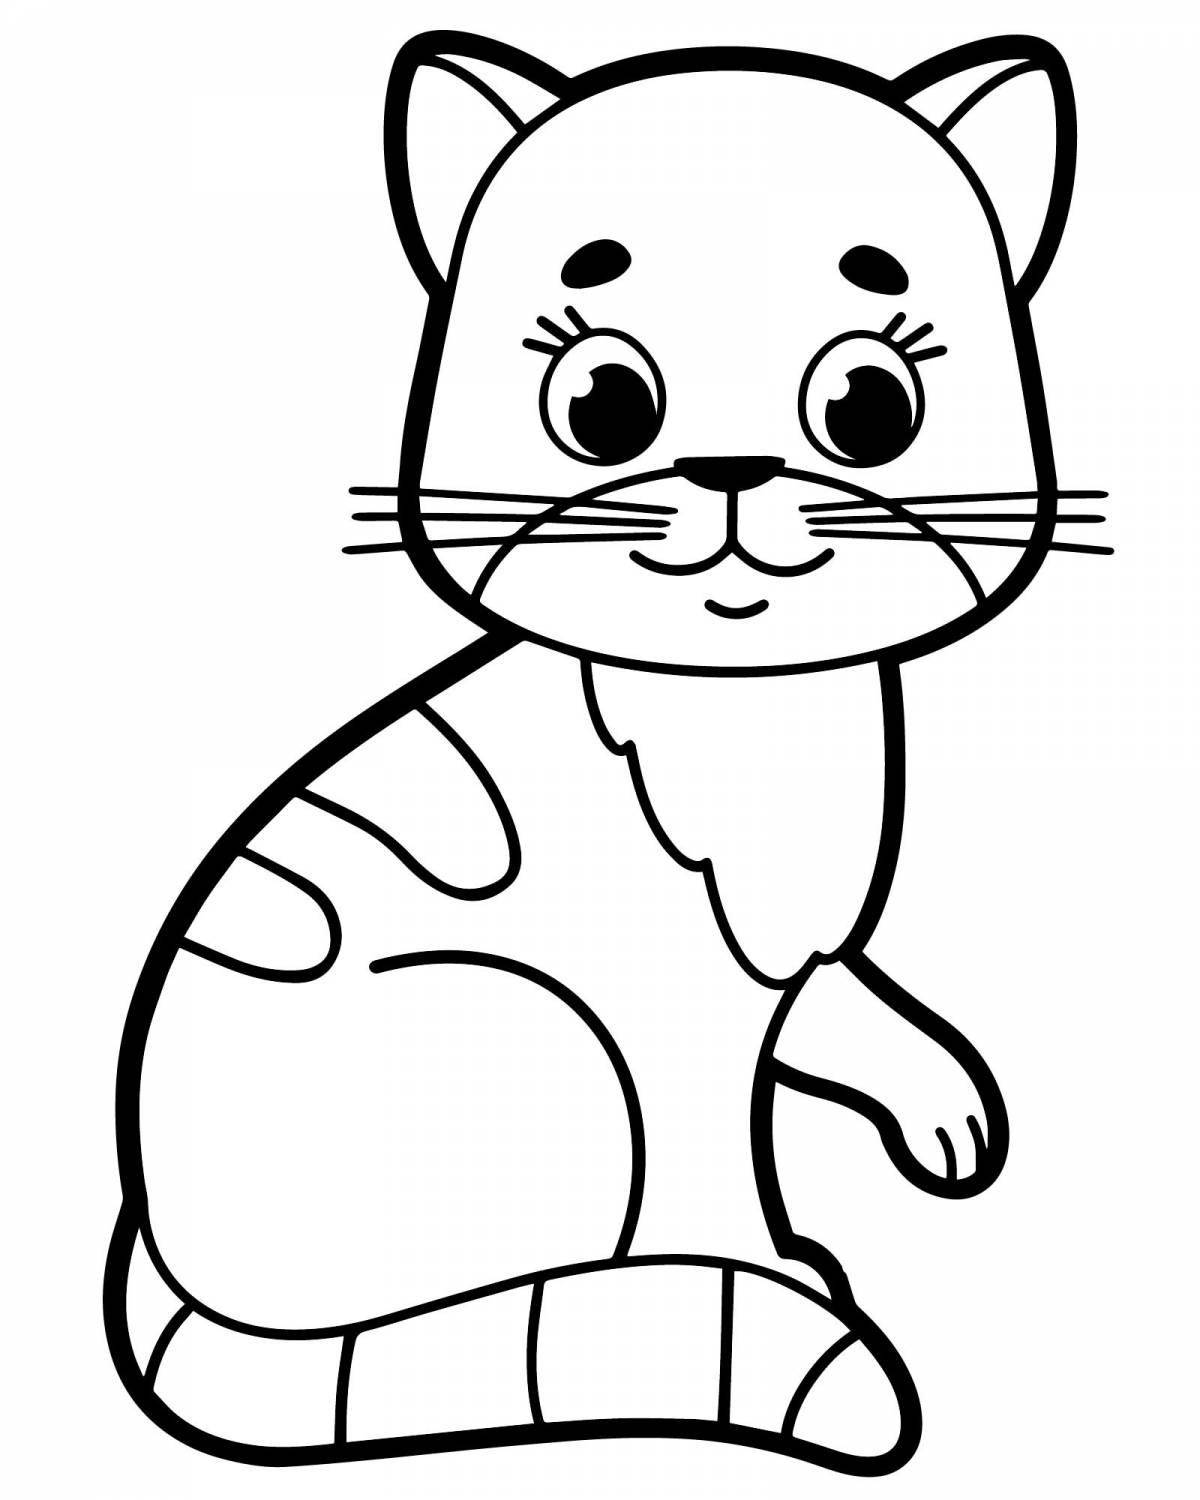 Animated cat coloring page for kids